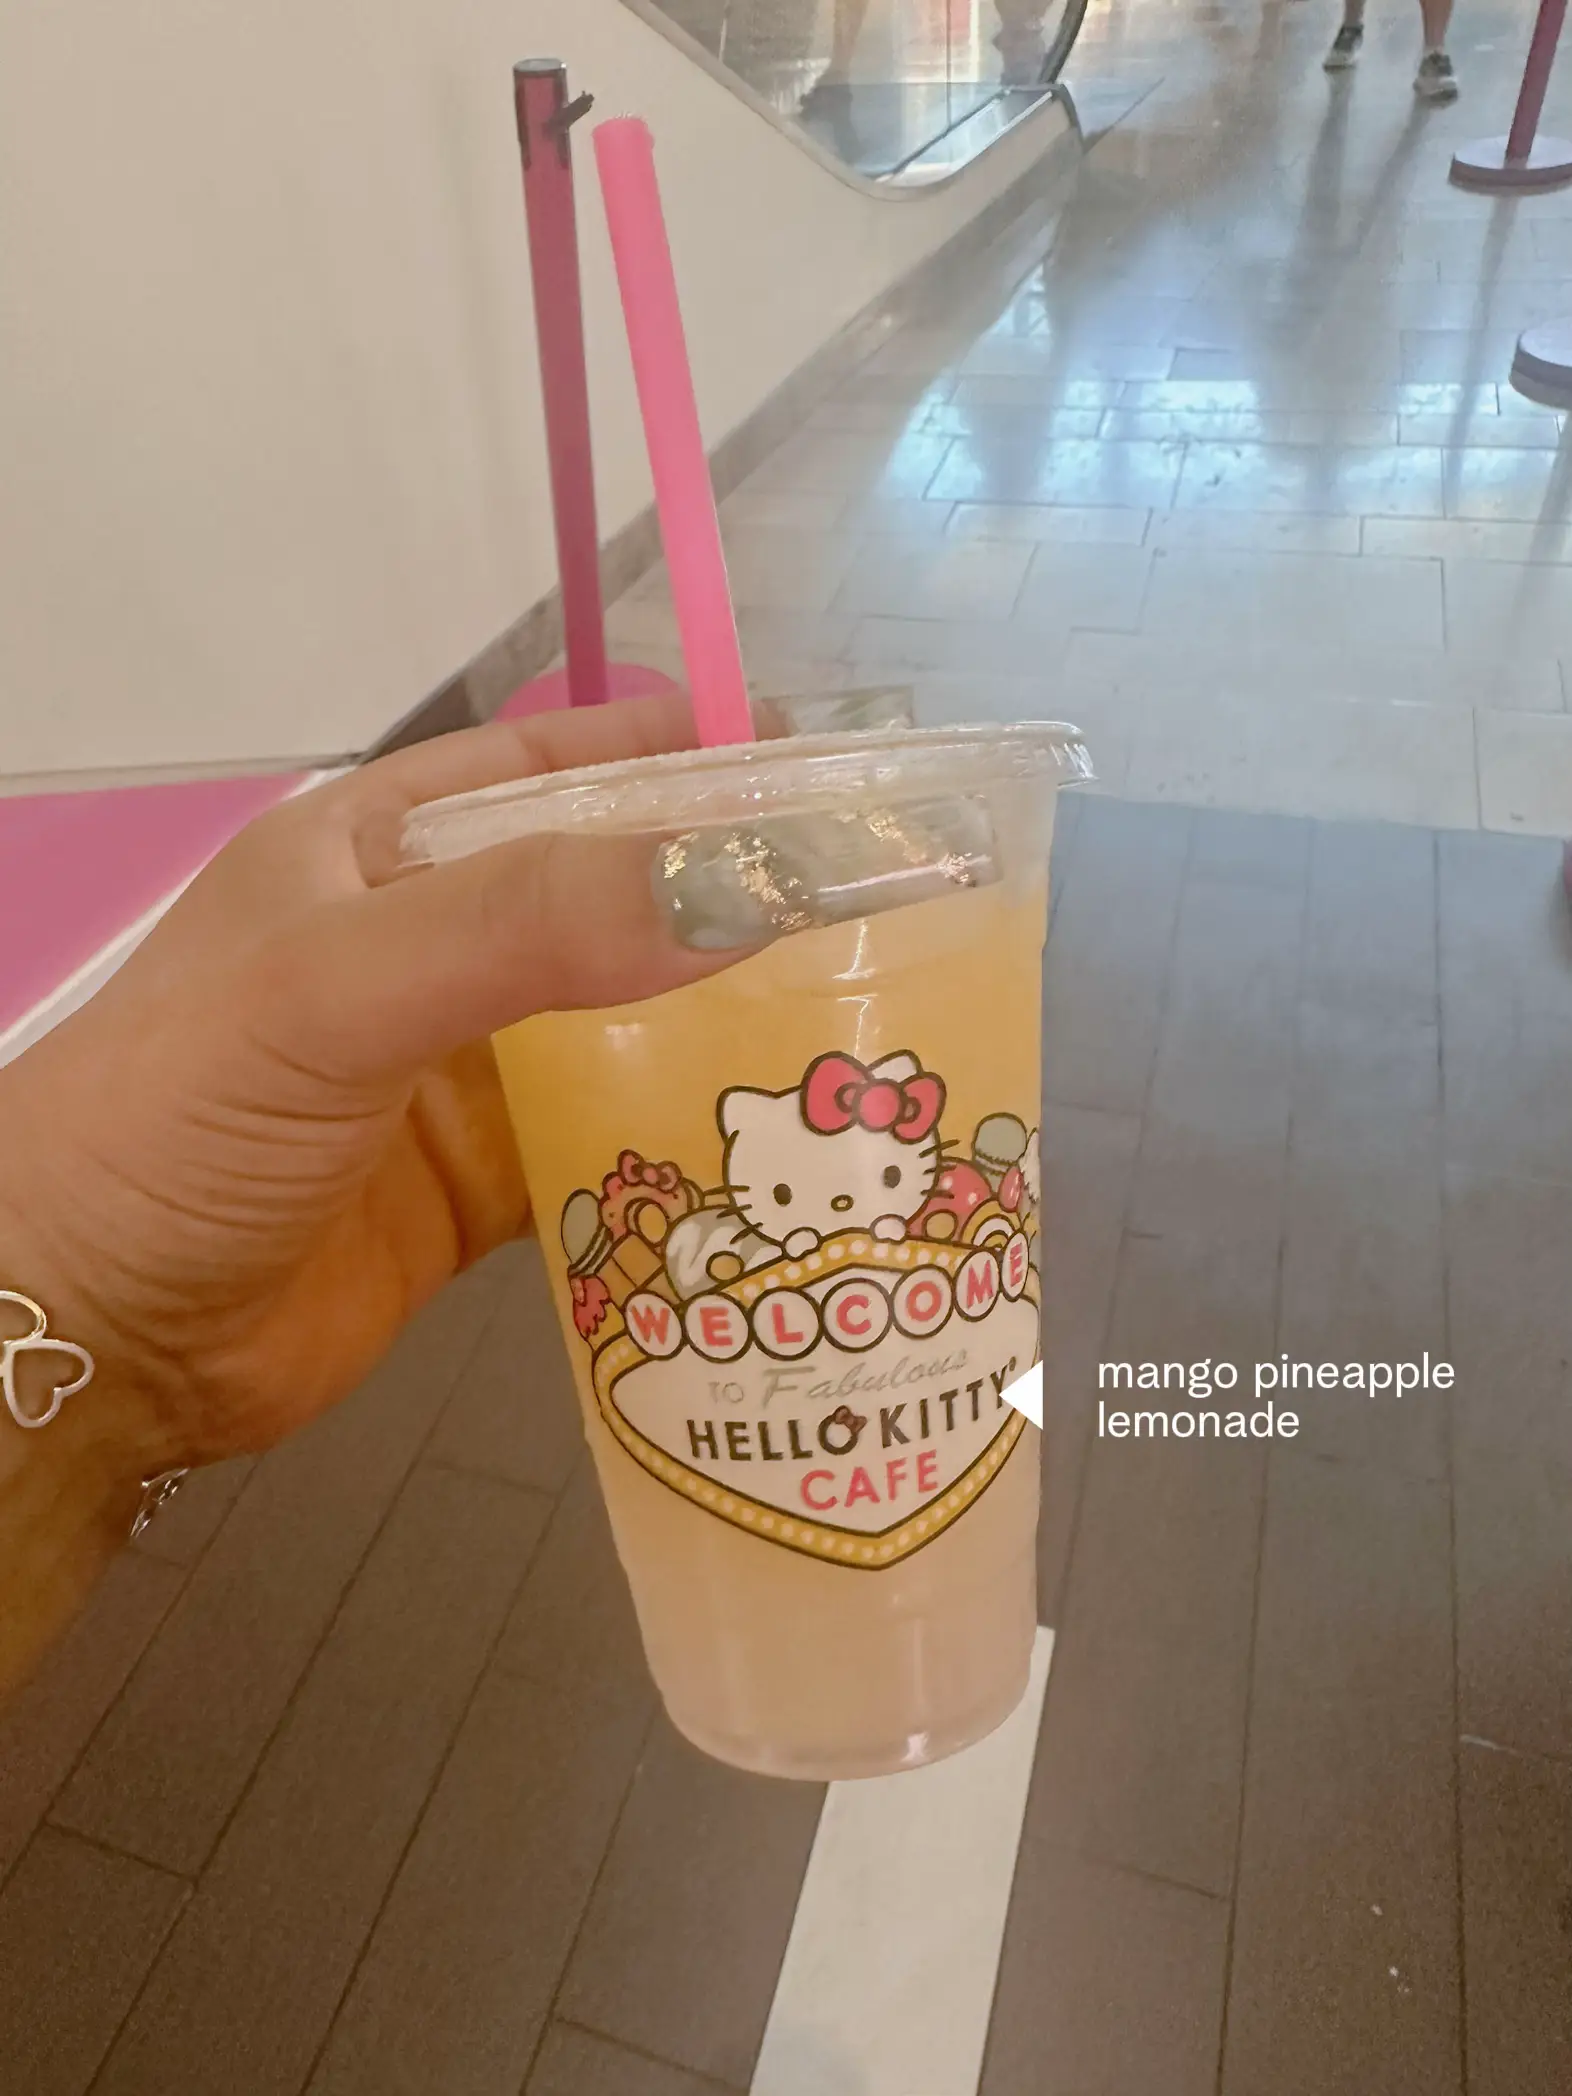 Hello Kitty Cafe on X: Weekend plans: a visit to #HelloKittyCafe